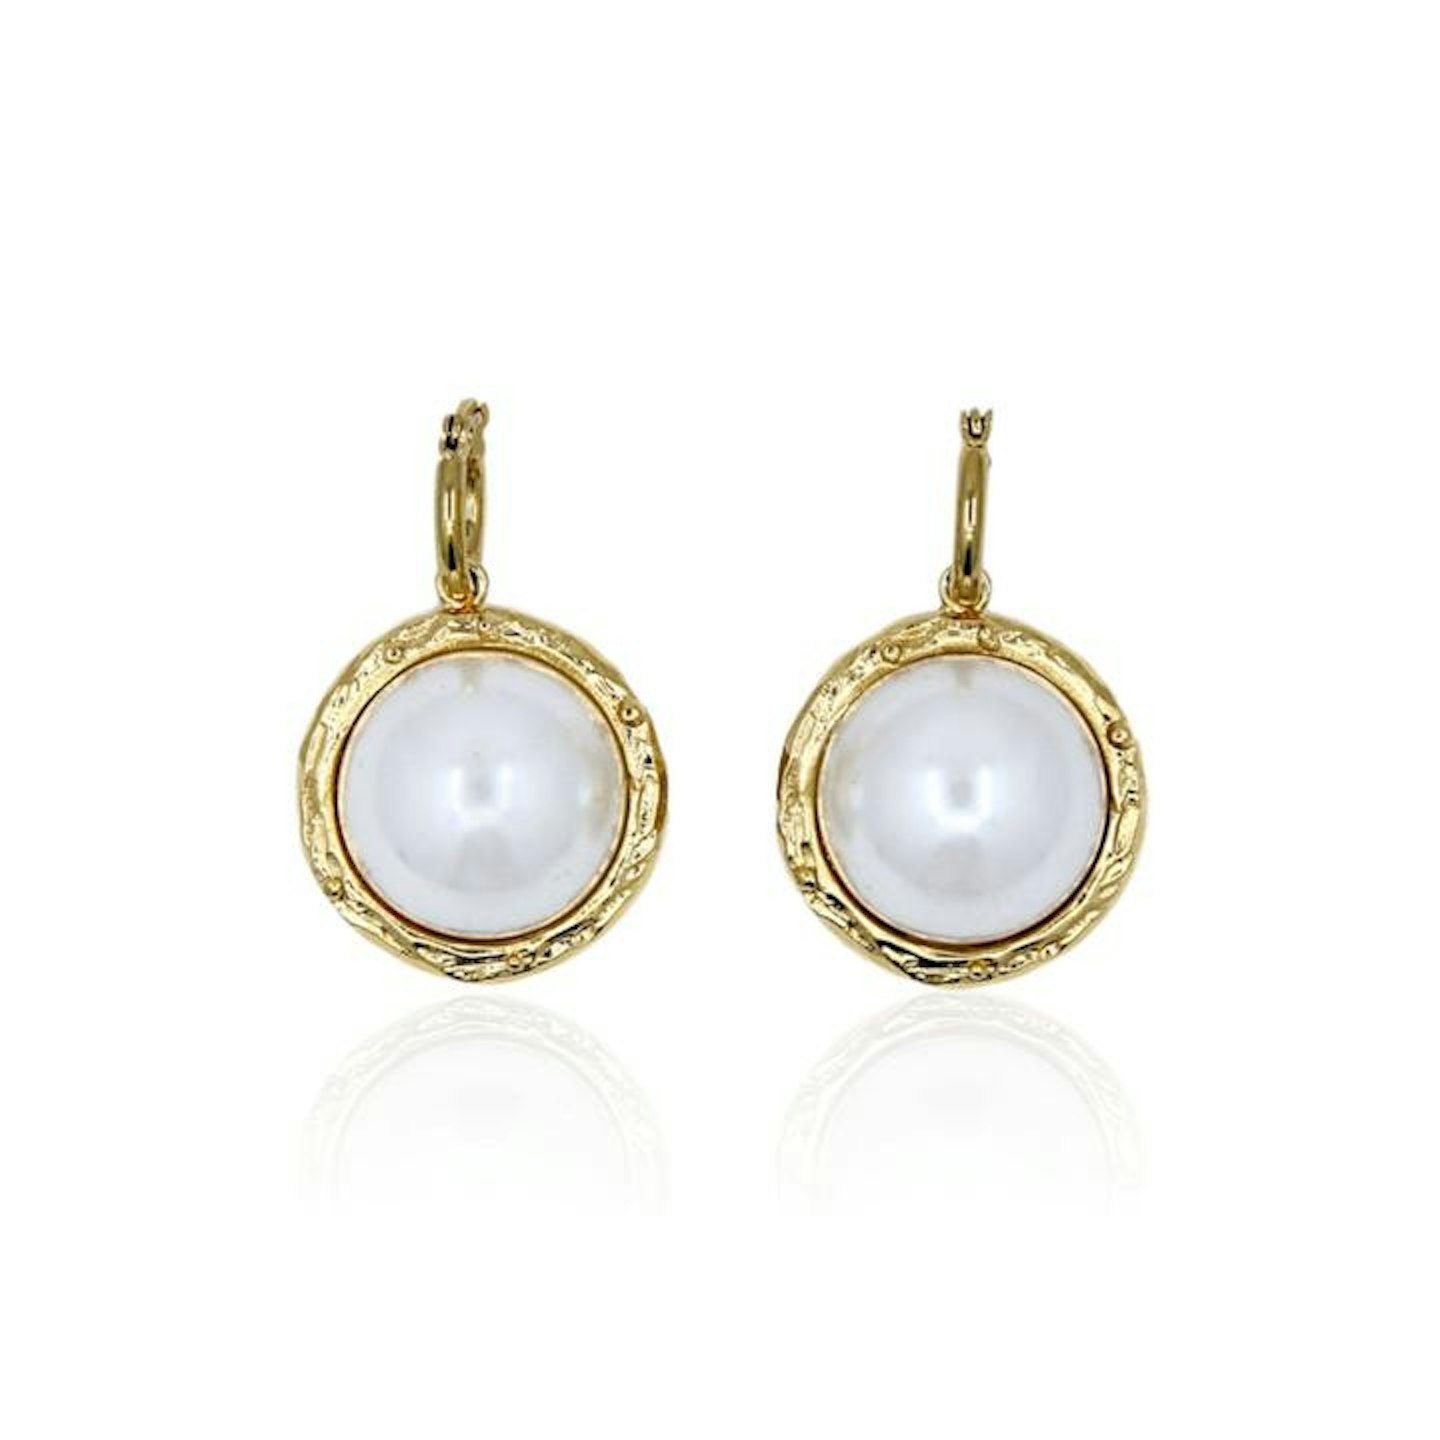 By Alona, Gold And Pearl Earrings, £155